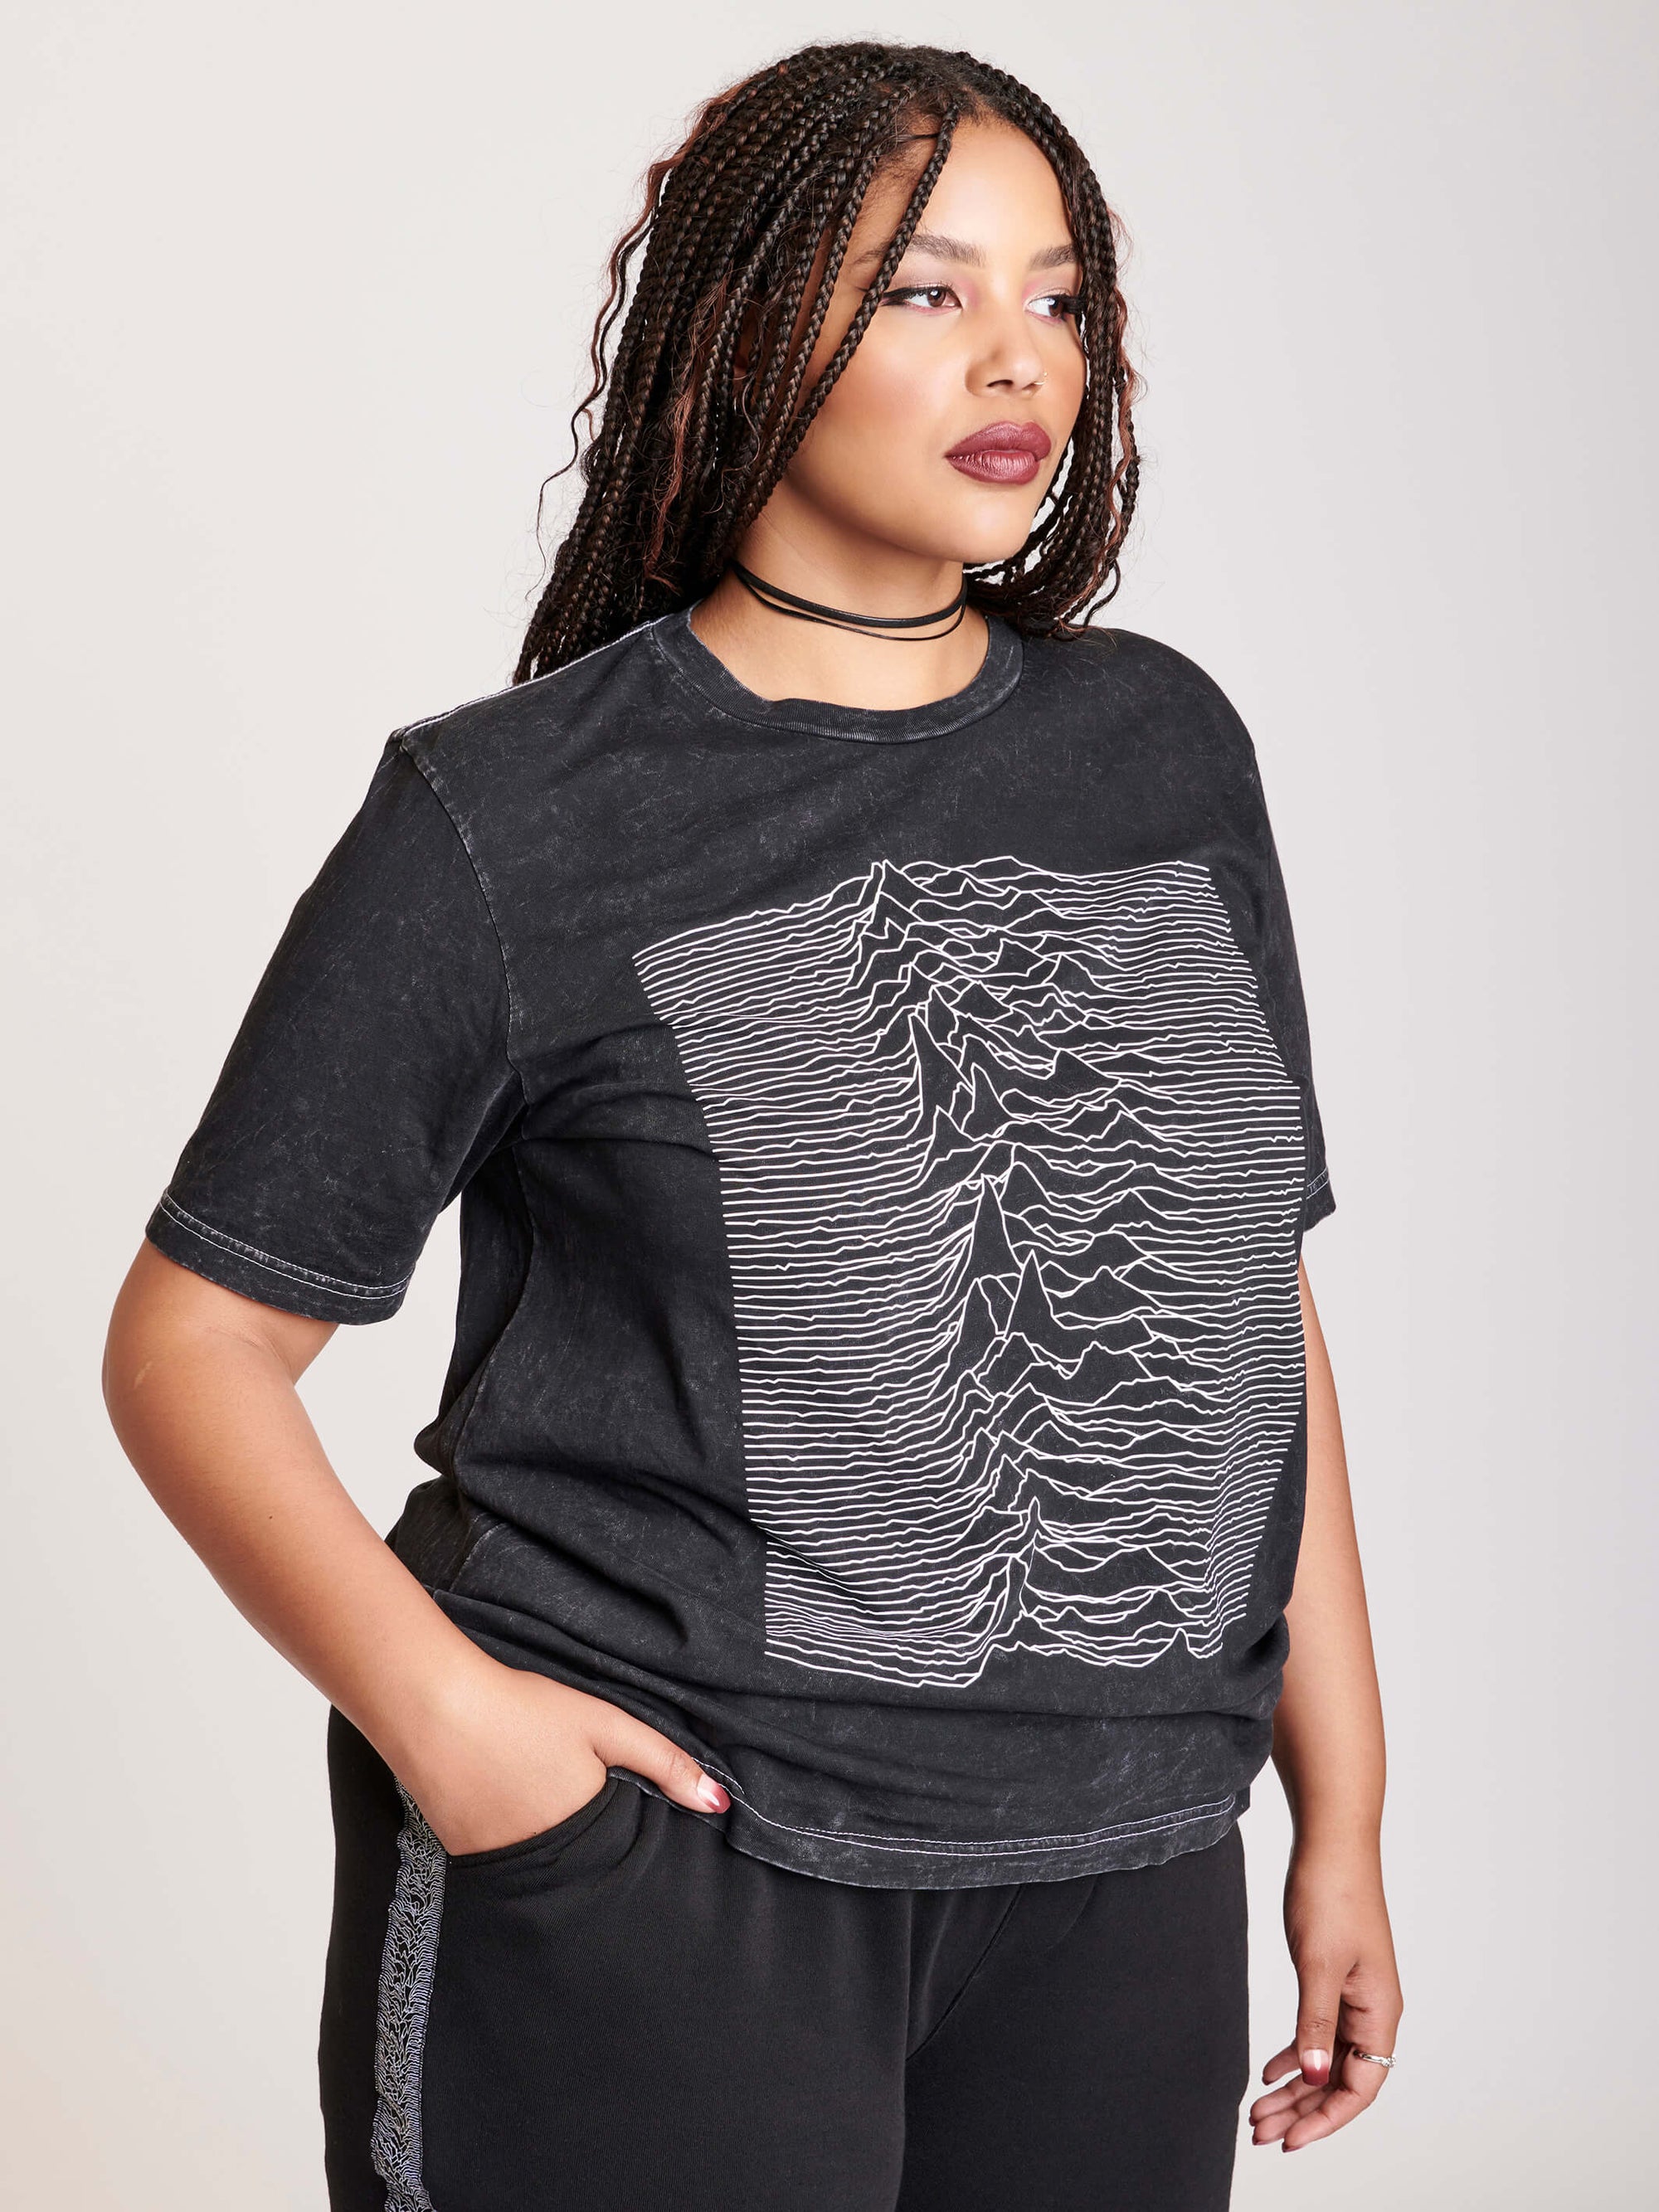 mineral wash t-shirt with front joy division art